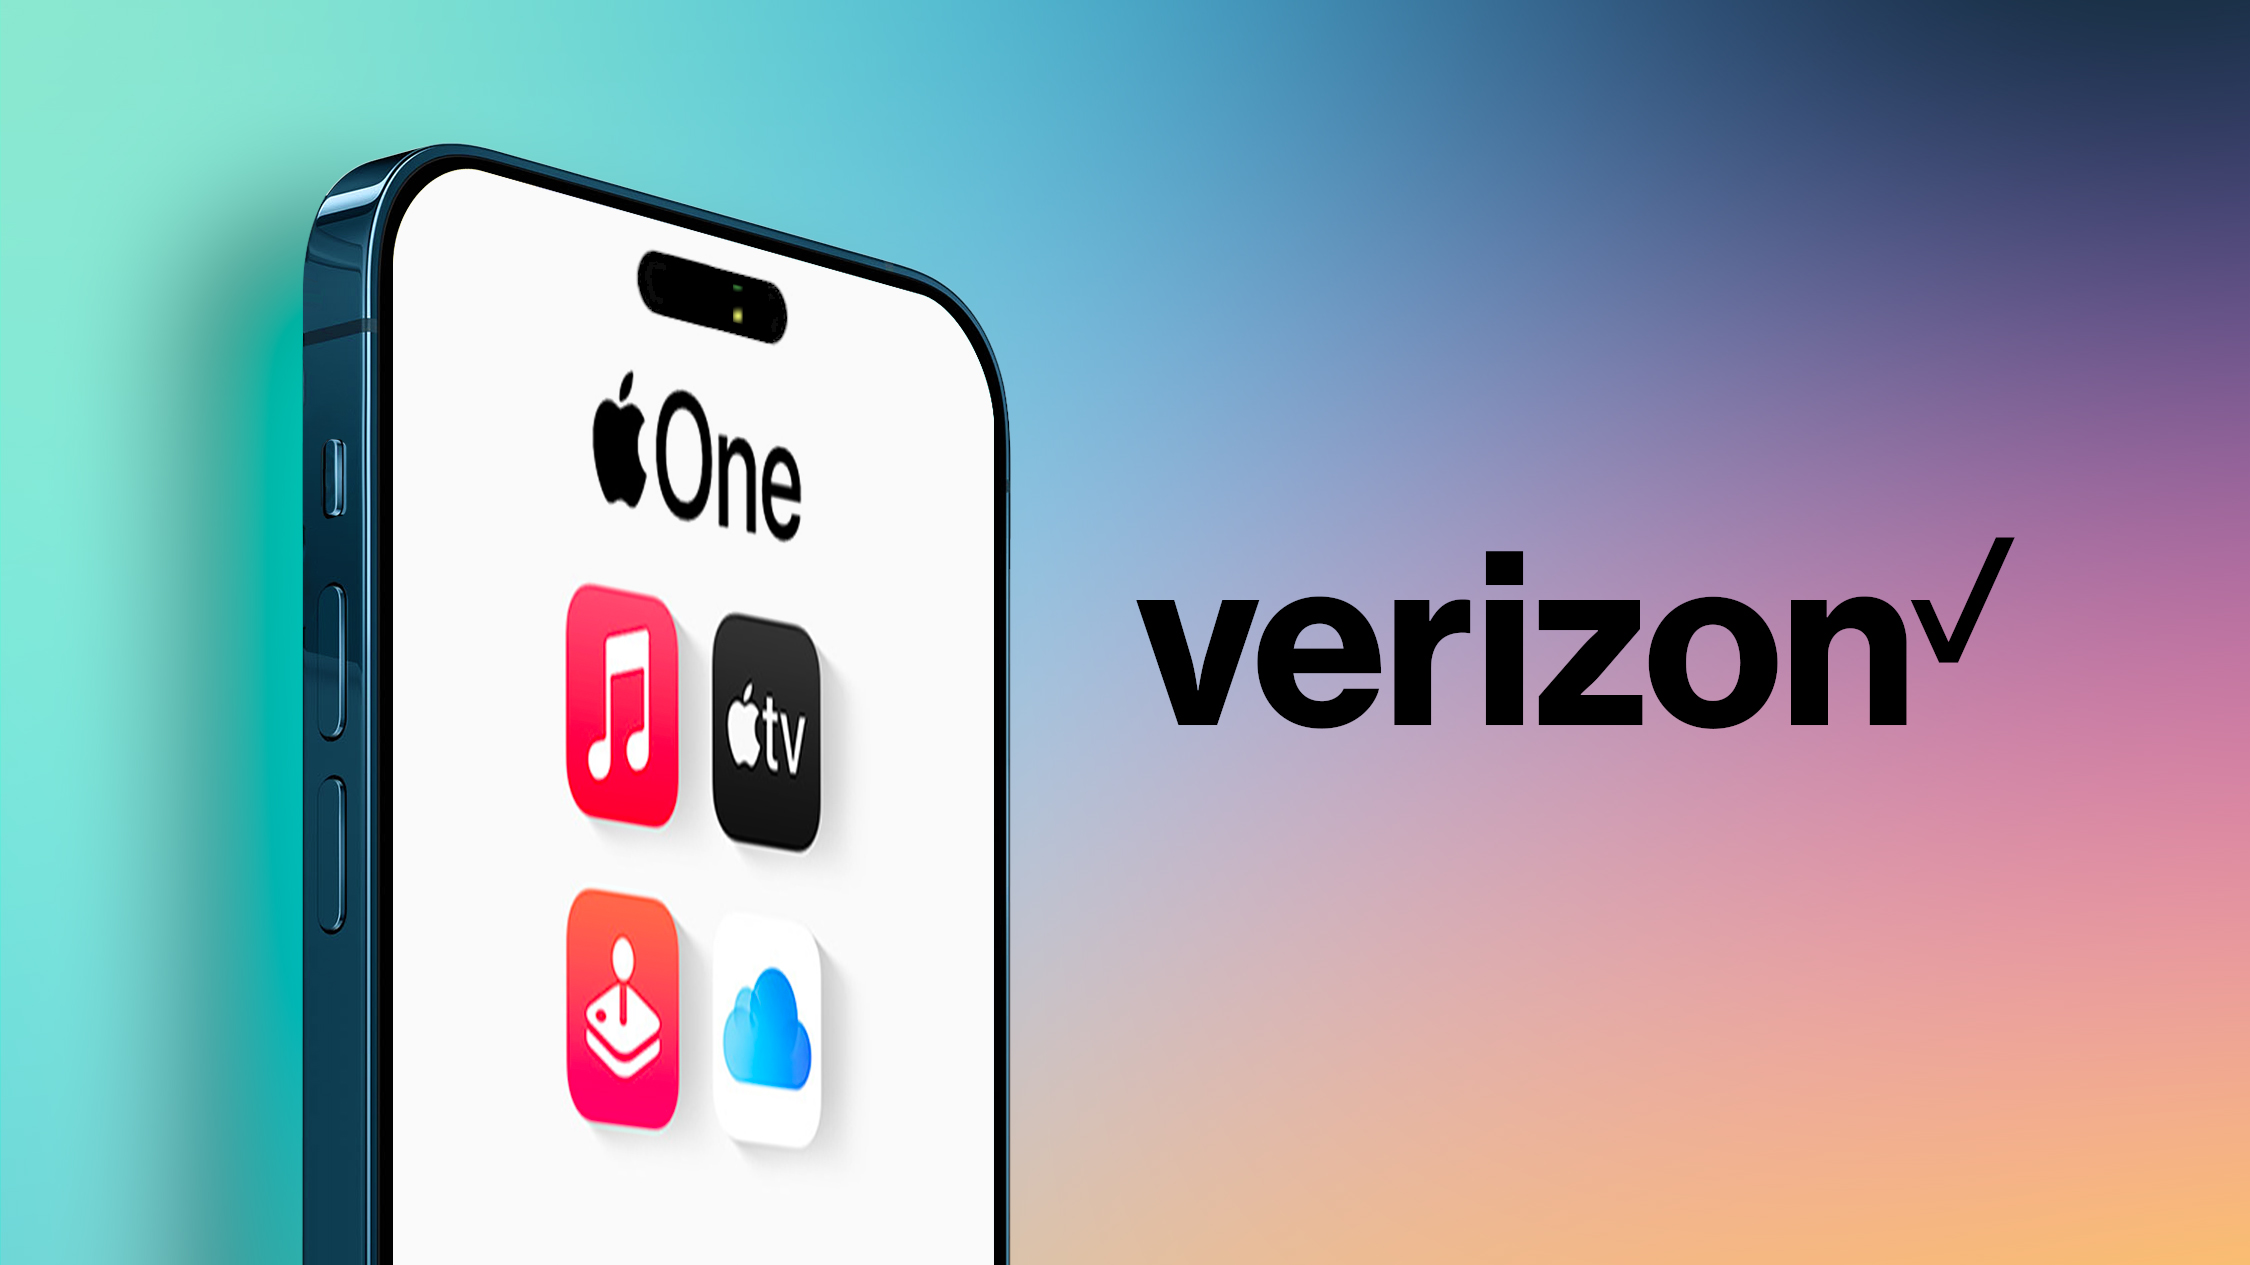 Verizon to Offer Apple One For Free With Eligible Plan Alongside iPhone 14 Launch